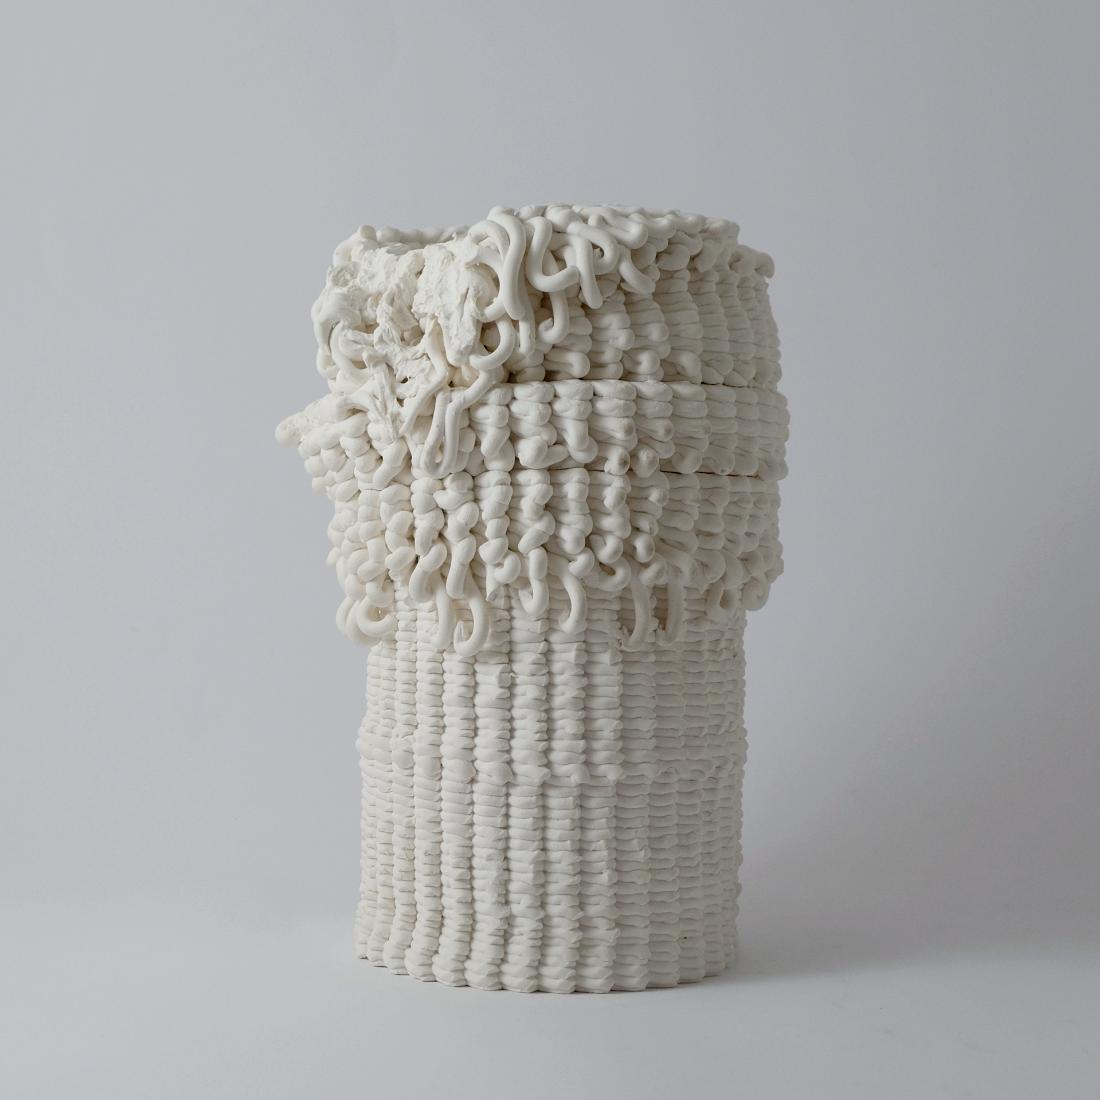 The first piece, made of printed porcelain, in the shape of a tube. Its texture is heavy, resembling vertical lines when looked at from afar.